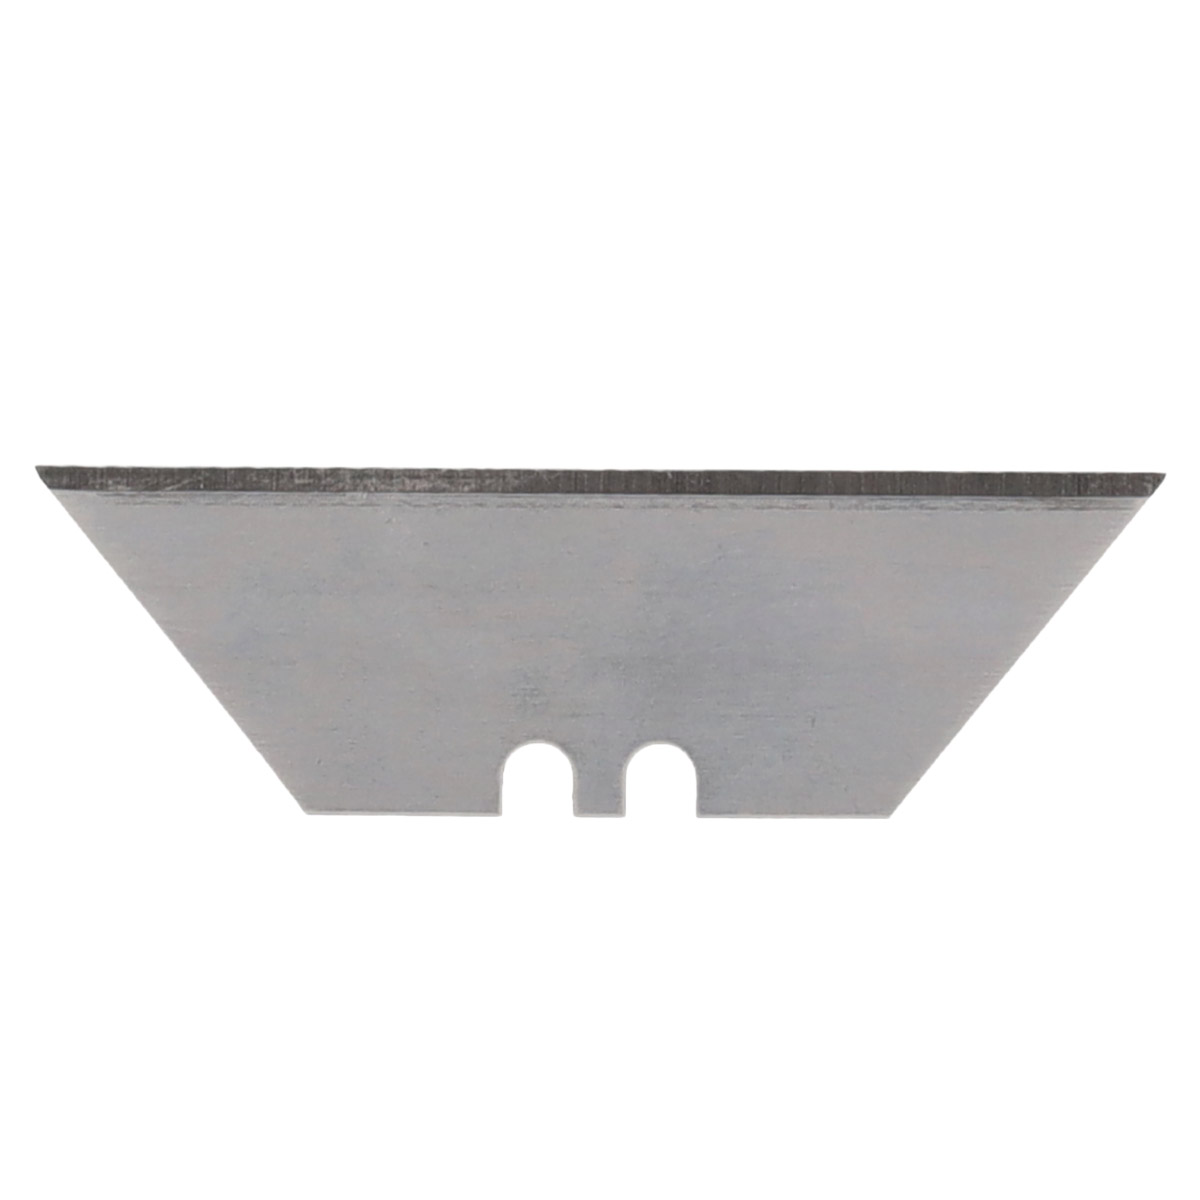 Spare blades for ref. 002102015 y 502030002